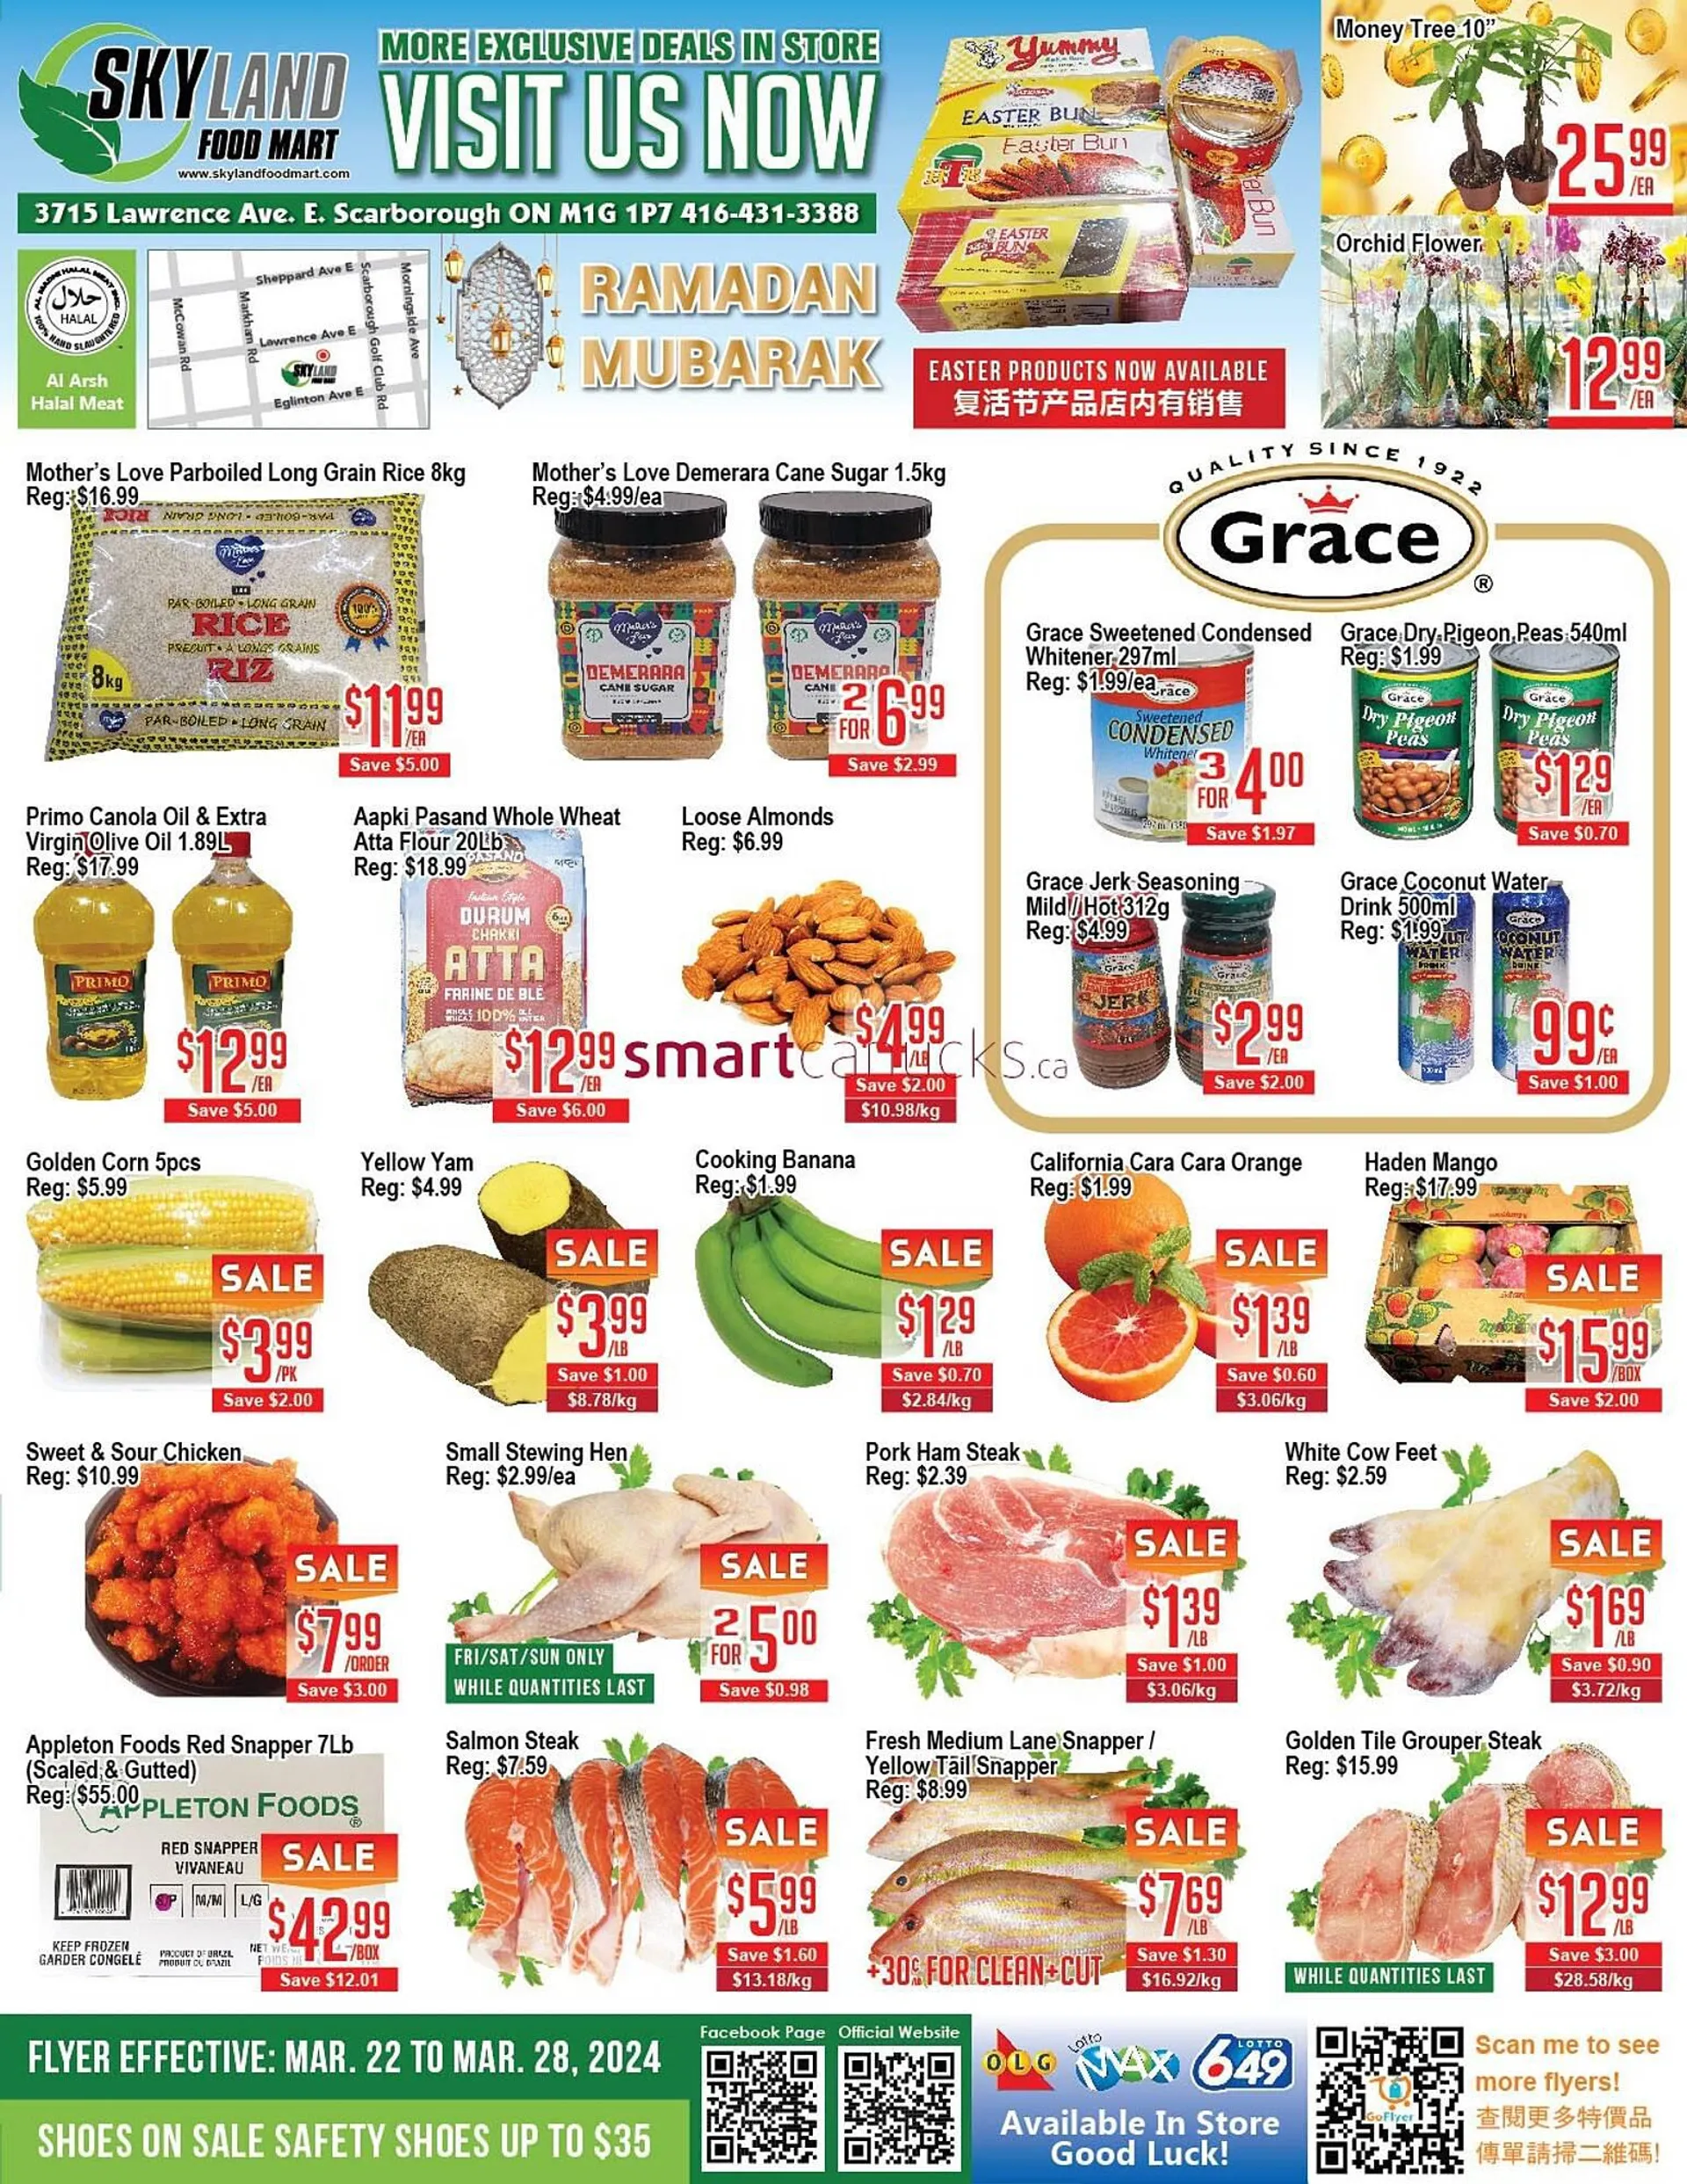 Skyland Foodmart flyer from March 22 to March 28 2024 - flyer page 1